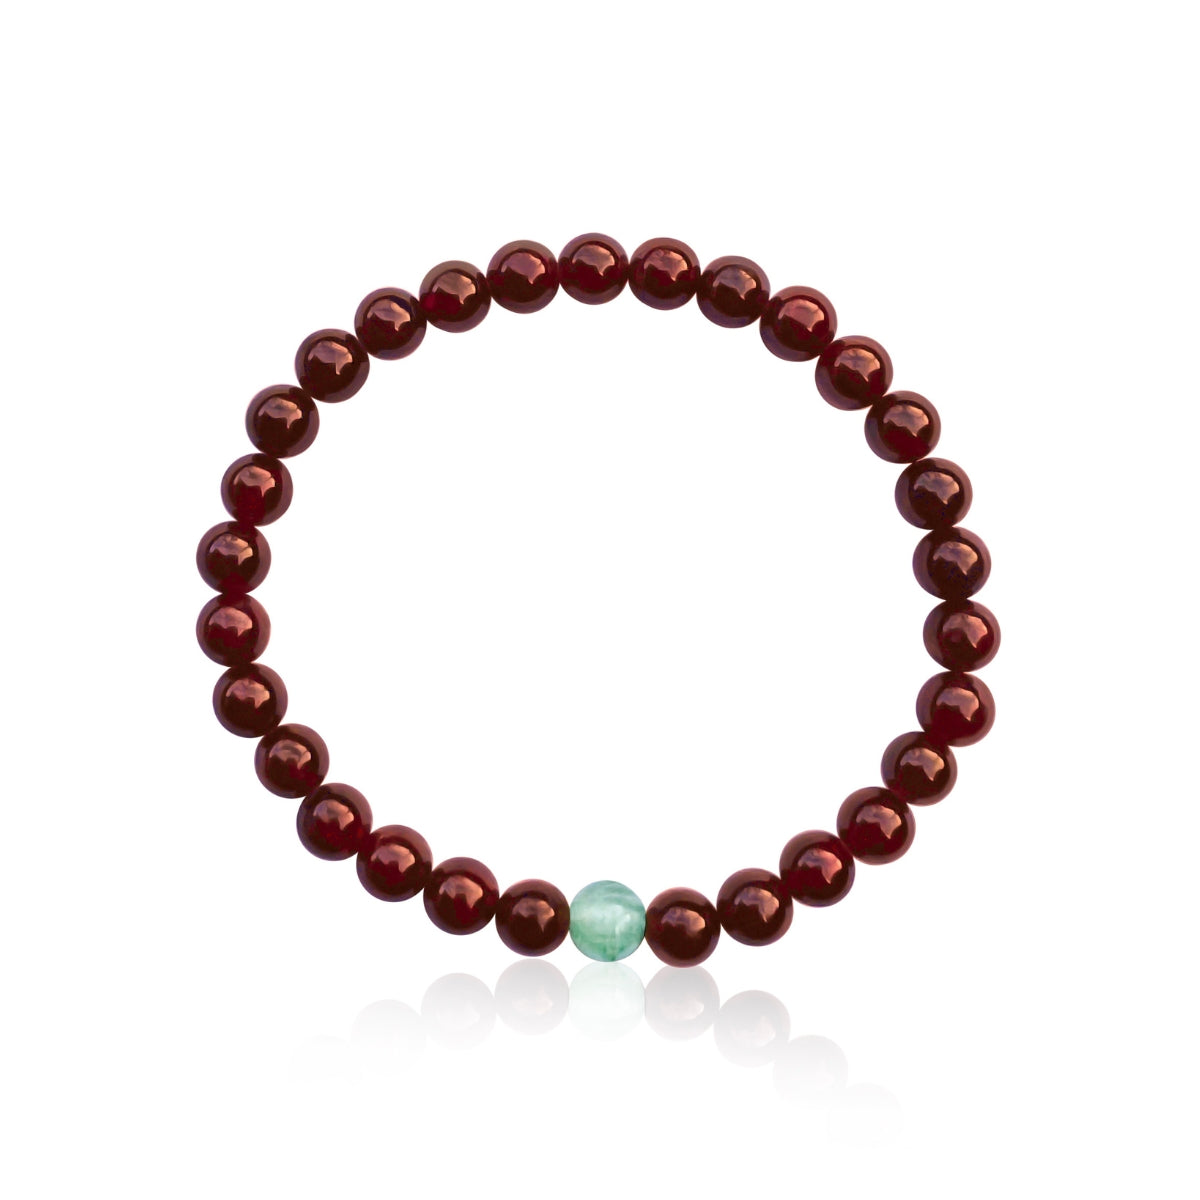 "You must not lose faith in humanity. Humanity is an ocean; if a few drops of the ocean are dirty, the ocean does not become dirty." -- Mahatma Gandhi. Wear this Uplifting Humanity Garnet Bracelet to strengthen your positive spirit.